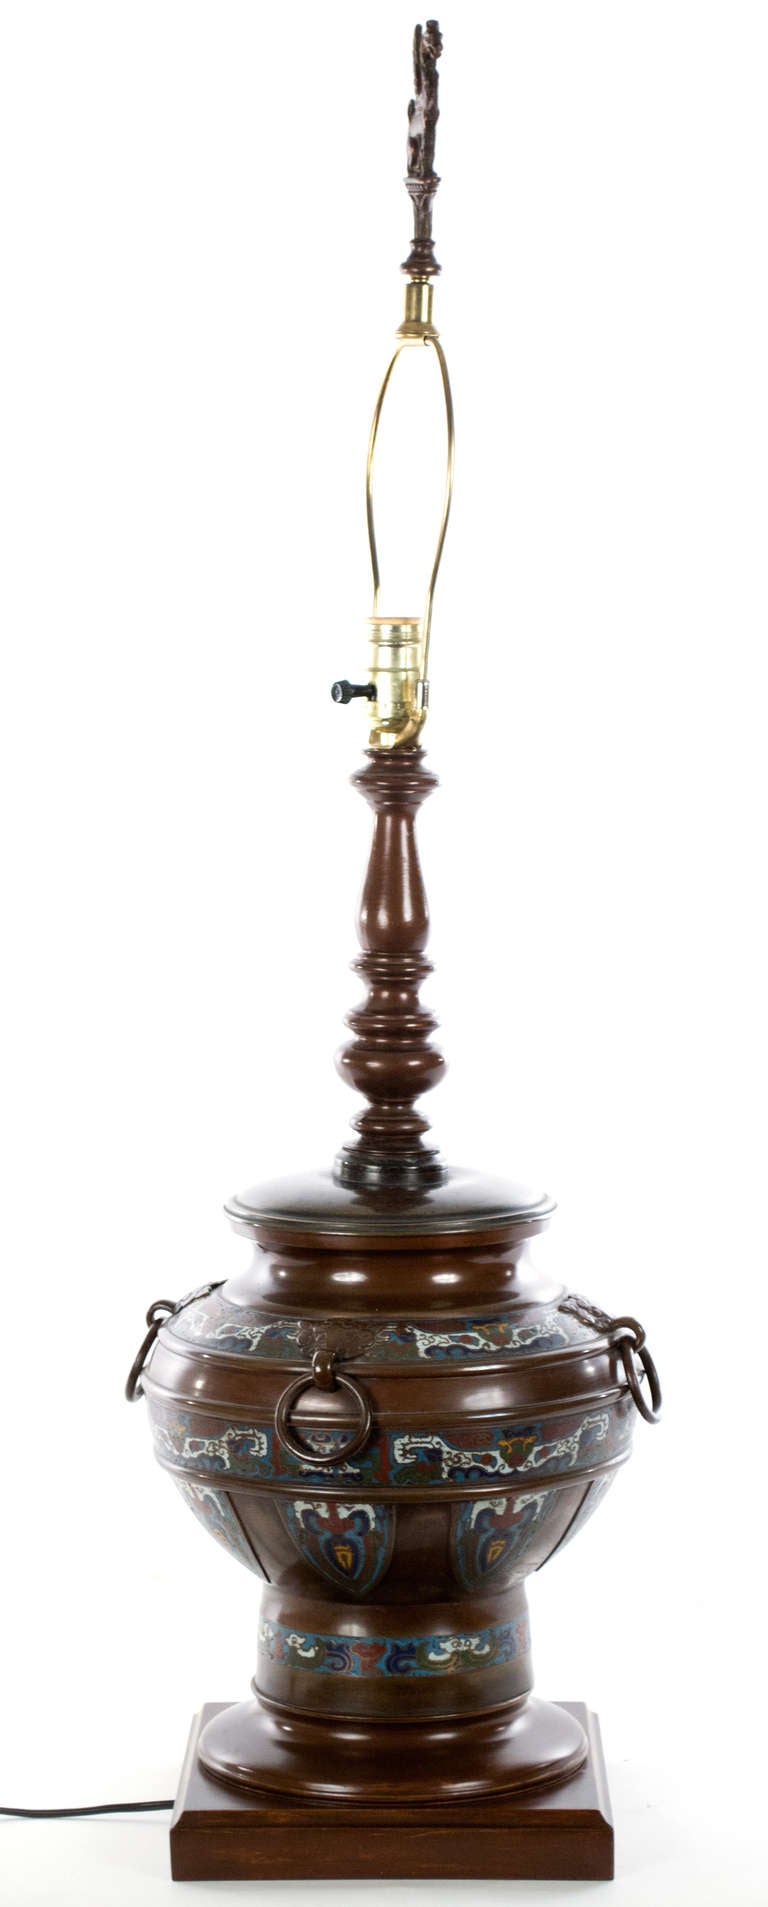 Based on the shapes of archaic Chinese temple censers, this large bronze table lamp is decorated with colorful champlevé enamel work and topped with the sculpture of a dragon.